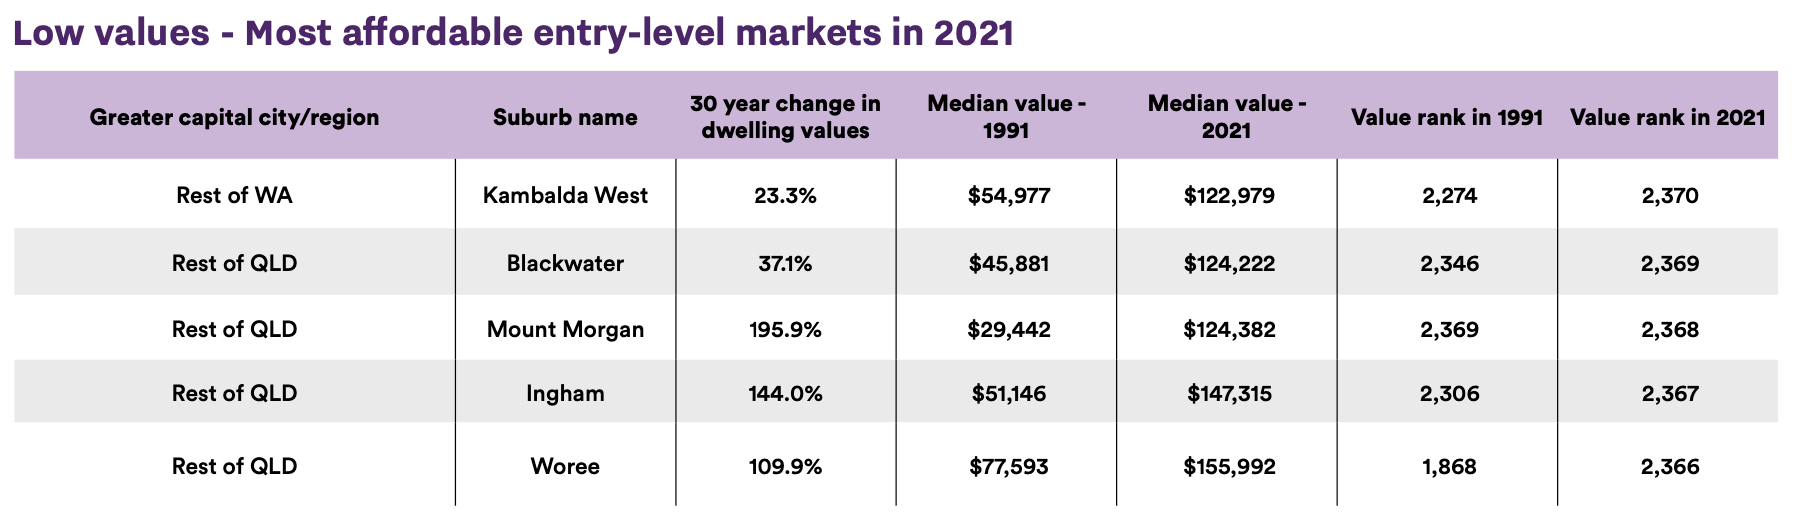 Low values – entry-level markets in 2021